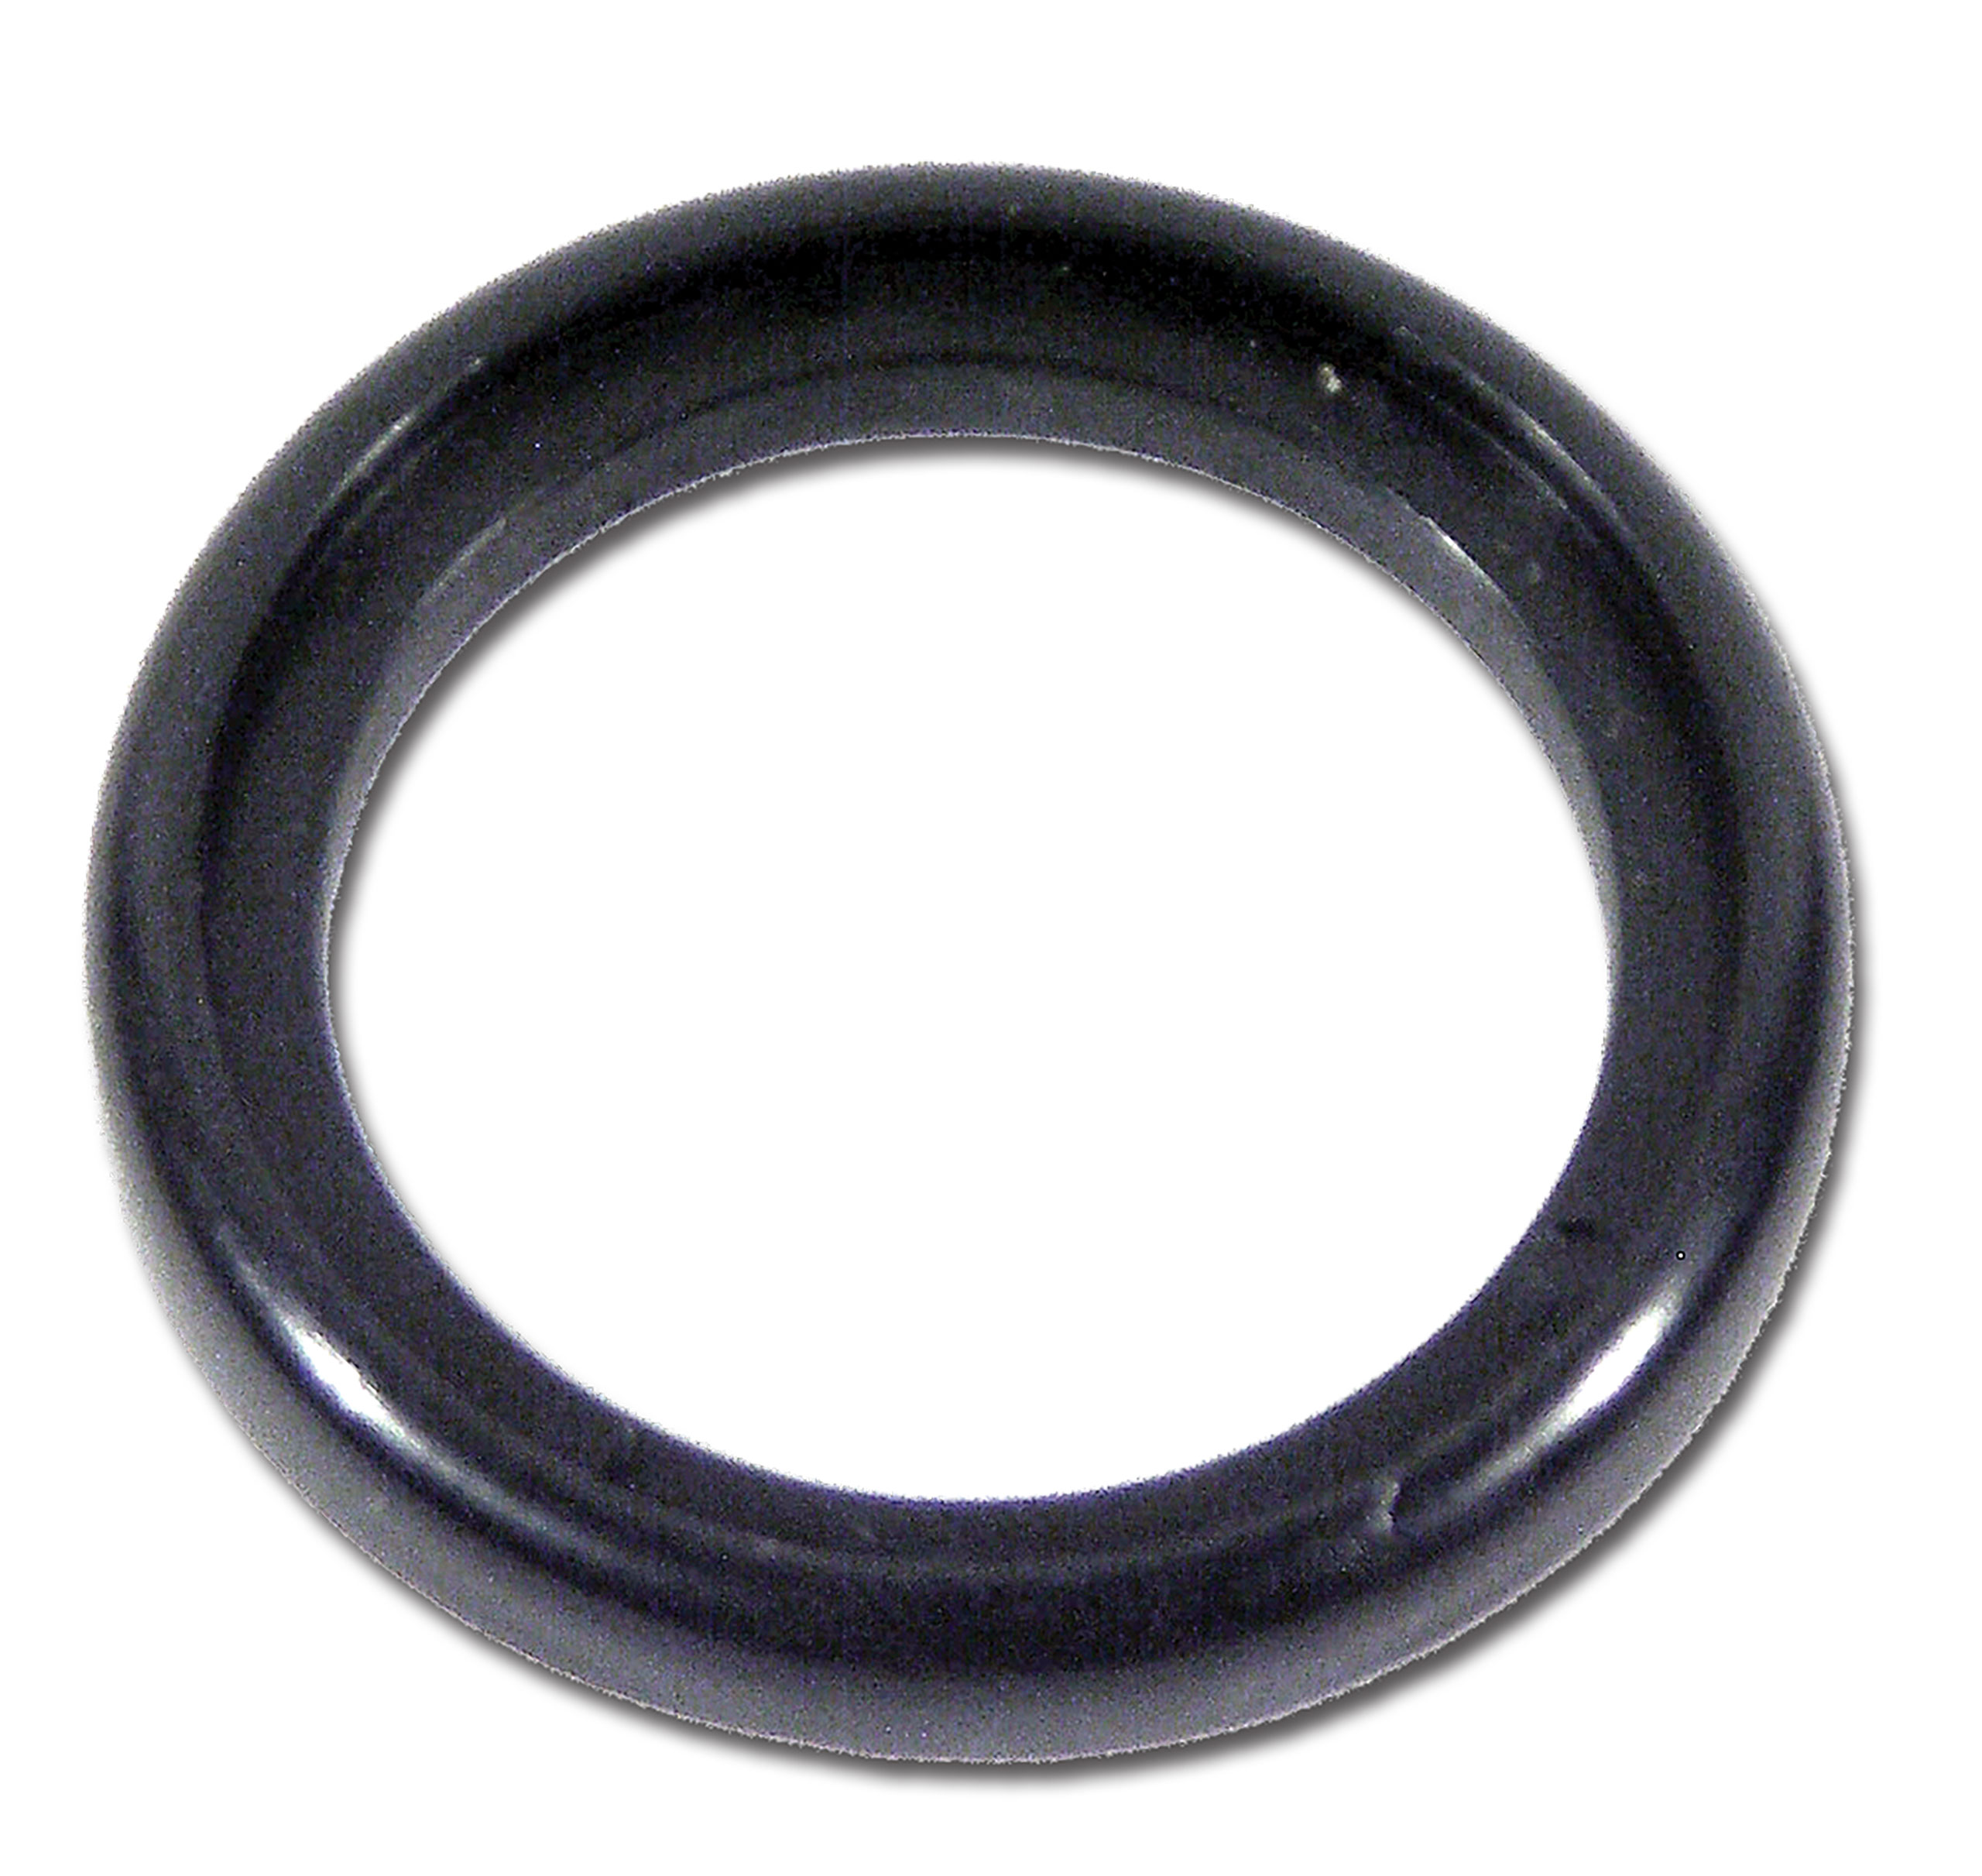 Auto Accessories of America 1961-1962 Chevrolet Corvette Antenna Mounting Gasket.